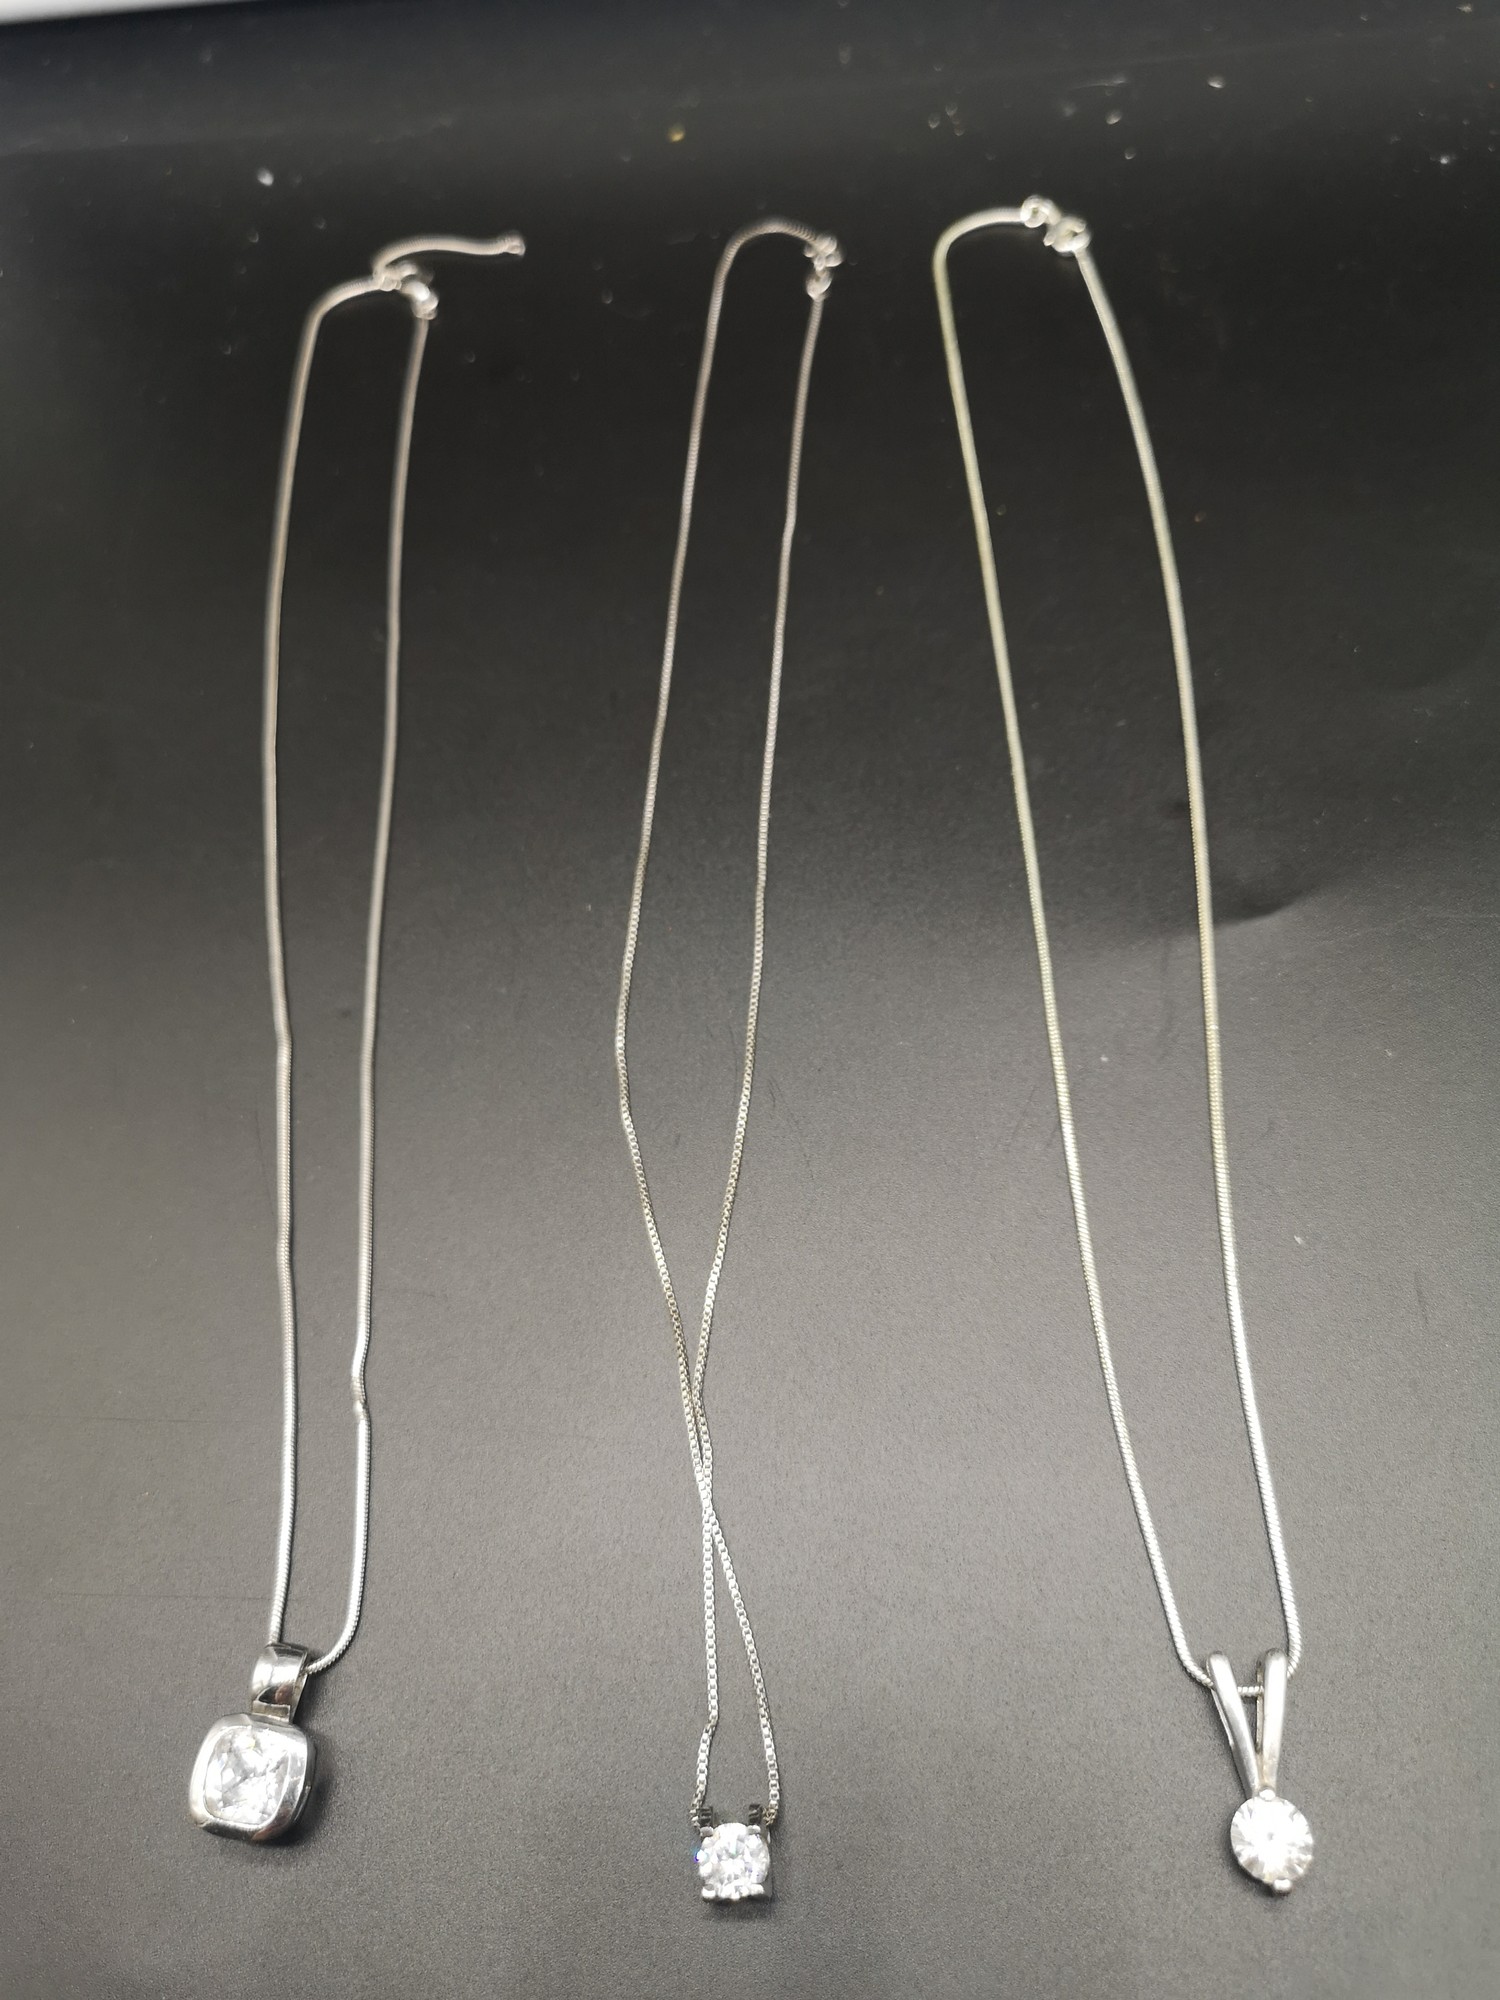 3 silver necklaces with pendants.